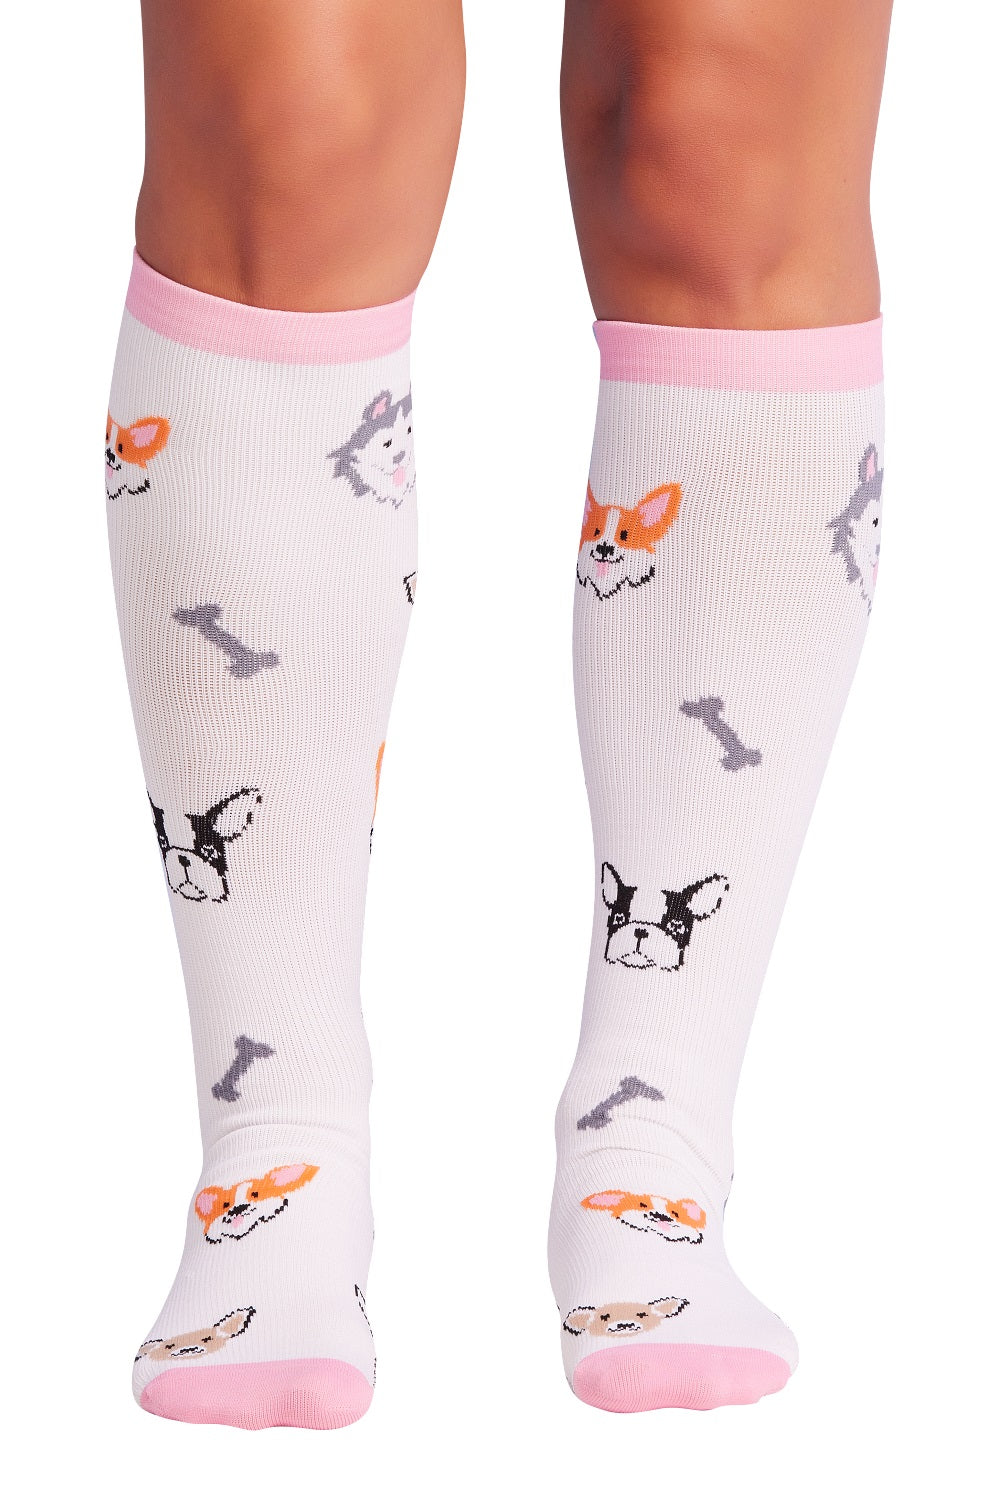 Cherokee Plus Print Support Mild Compression Socks Wide Calf 8-12 mmHg in pattern Dog Love at Parker's Clothing and Shoes.